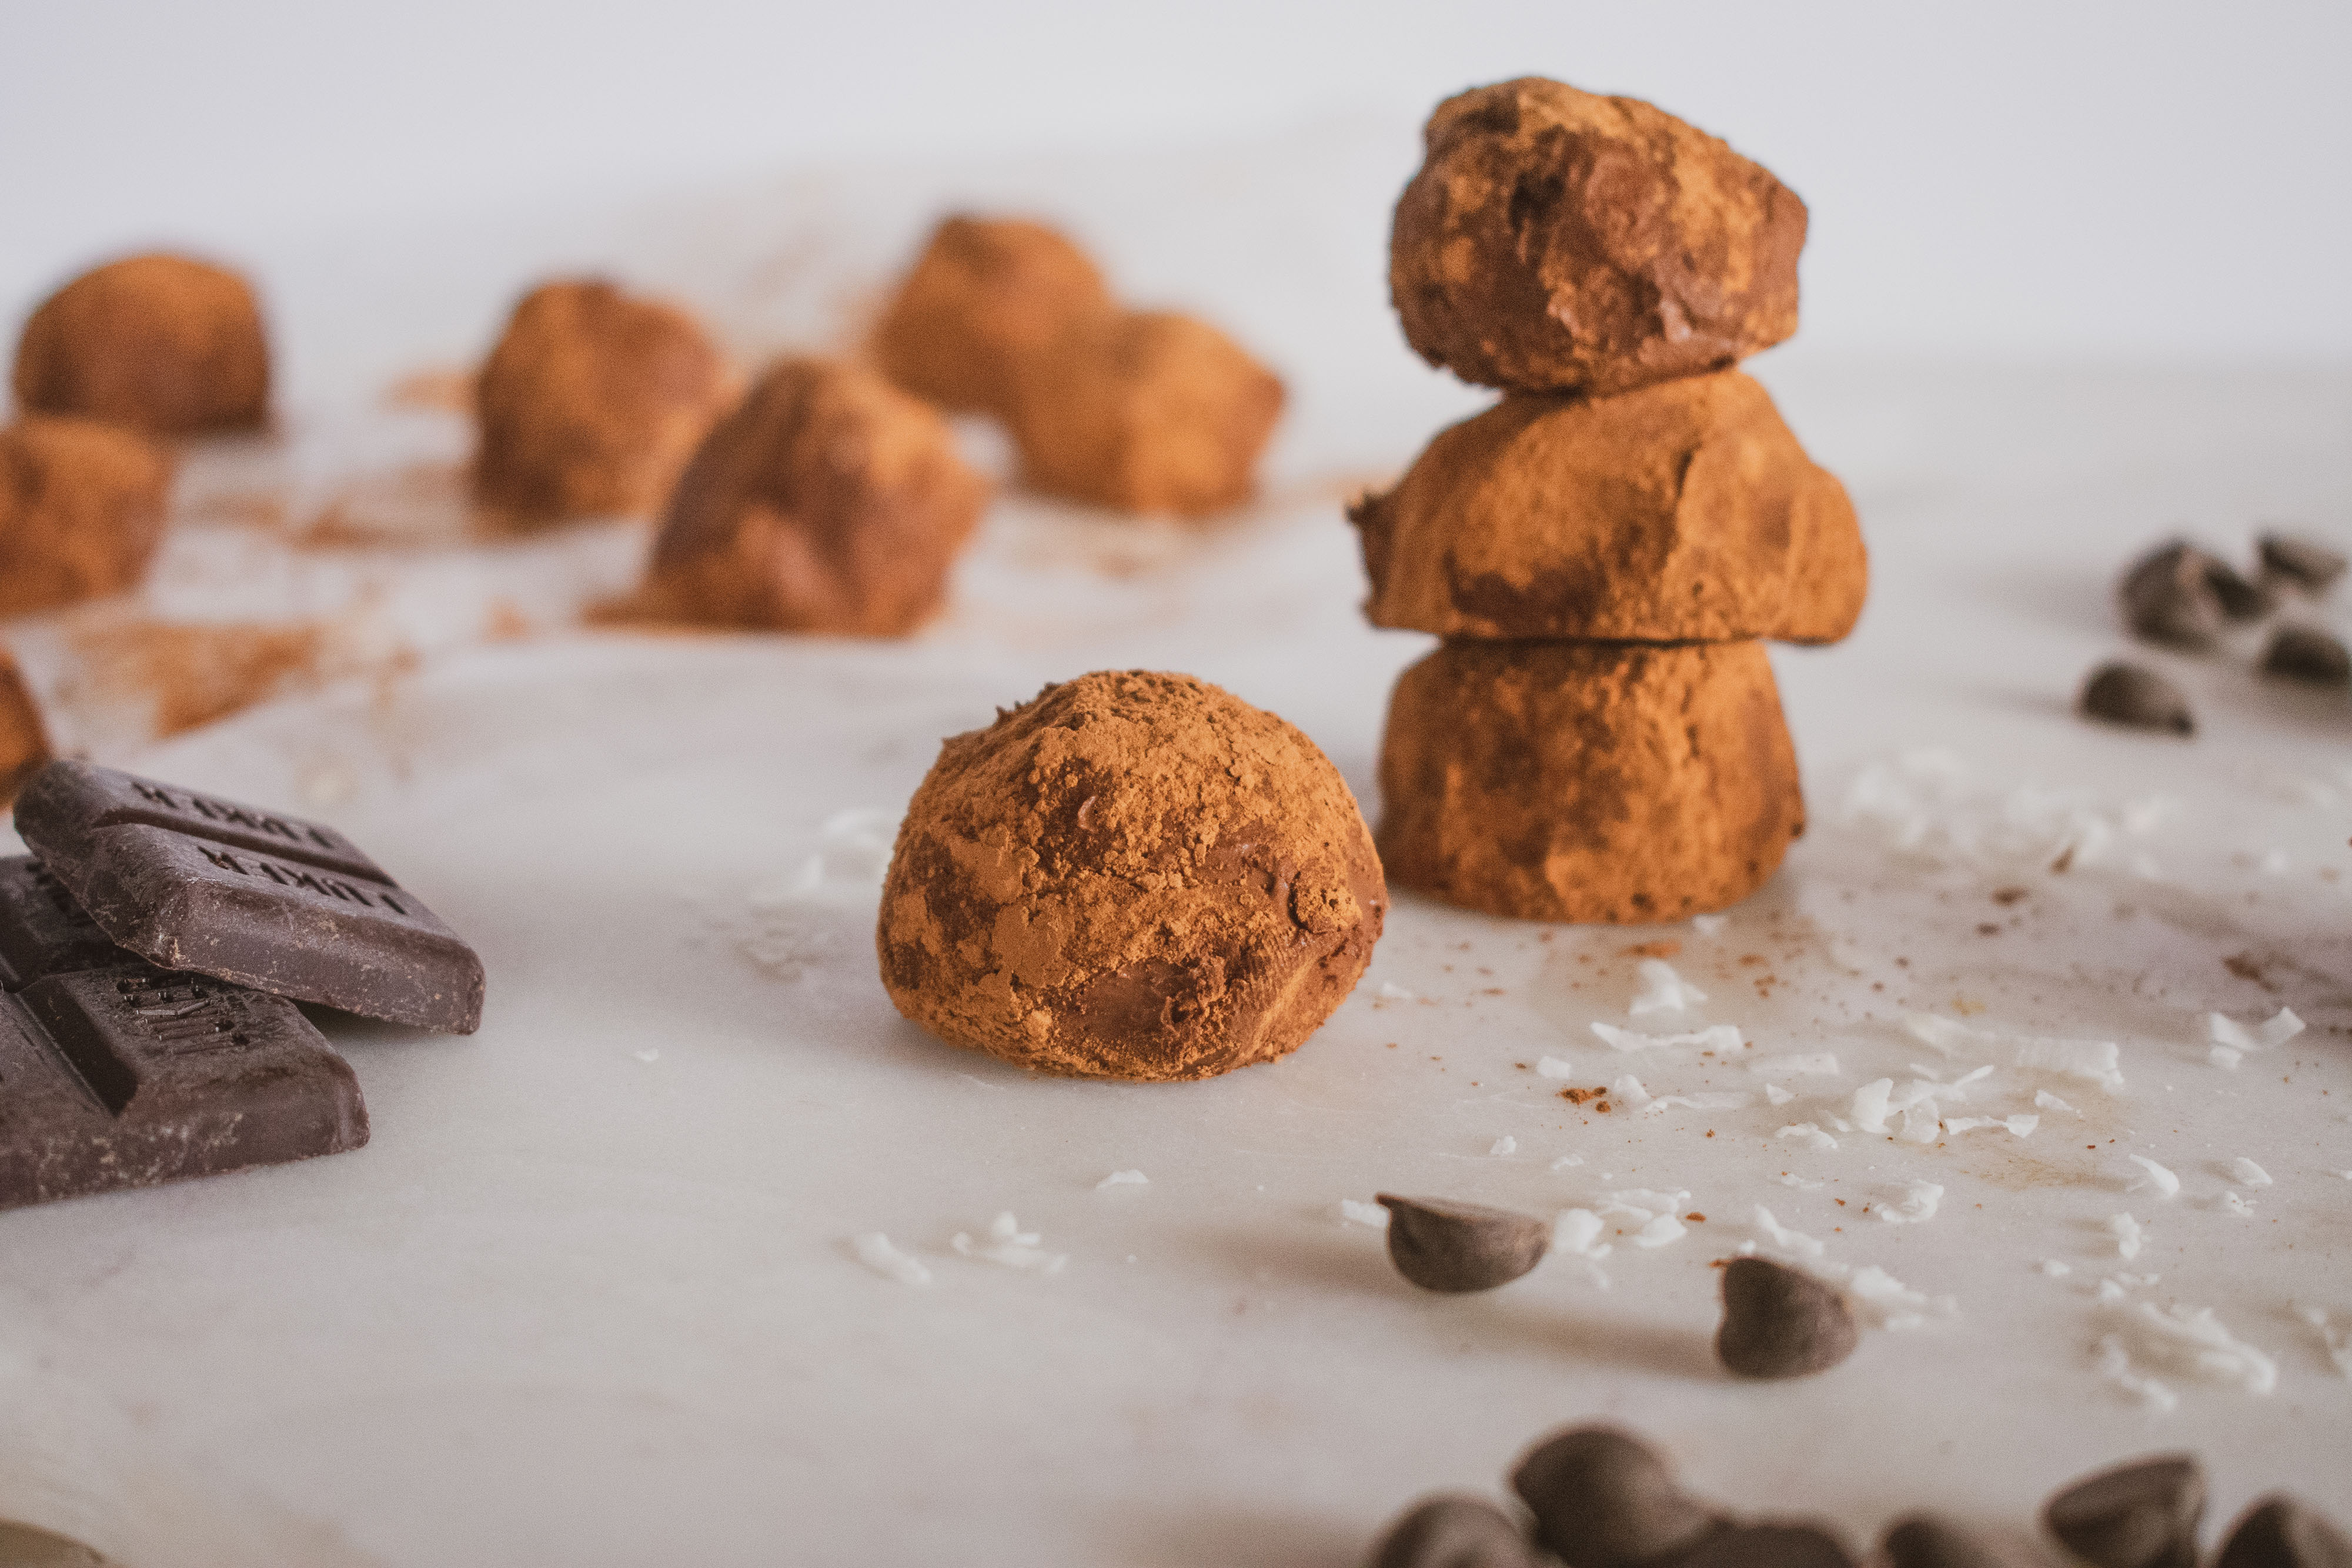 Cocoa powder covered keto chocolate truffles. Set on a white surface with chocolate chips.